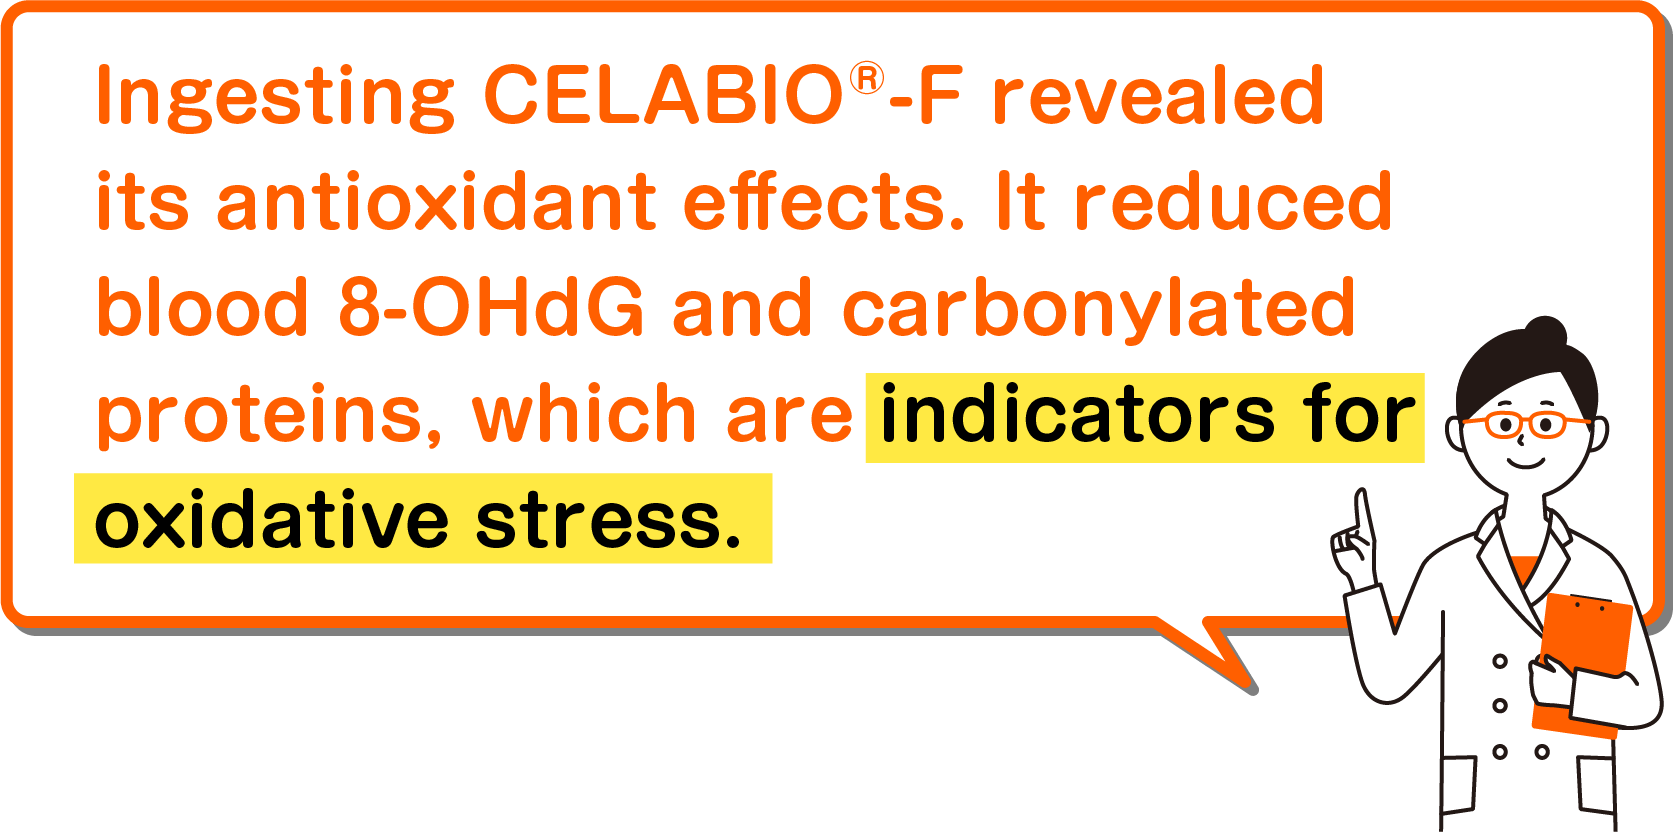 Ingesting CELABIO®-F revealed its antioxidant effects. It reduced blood 8-OHdG and carbonylated proteins, which are indicators for oxidative stress.